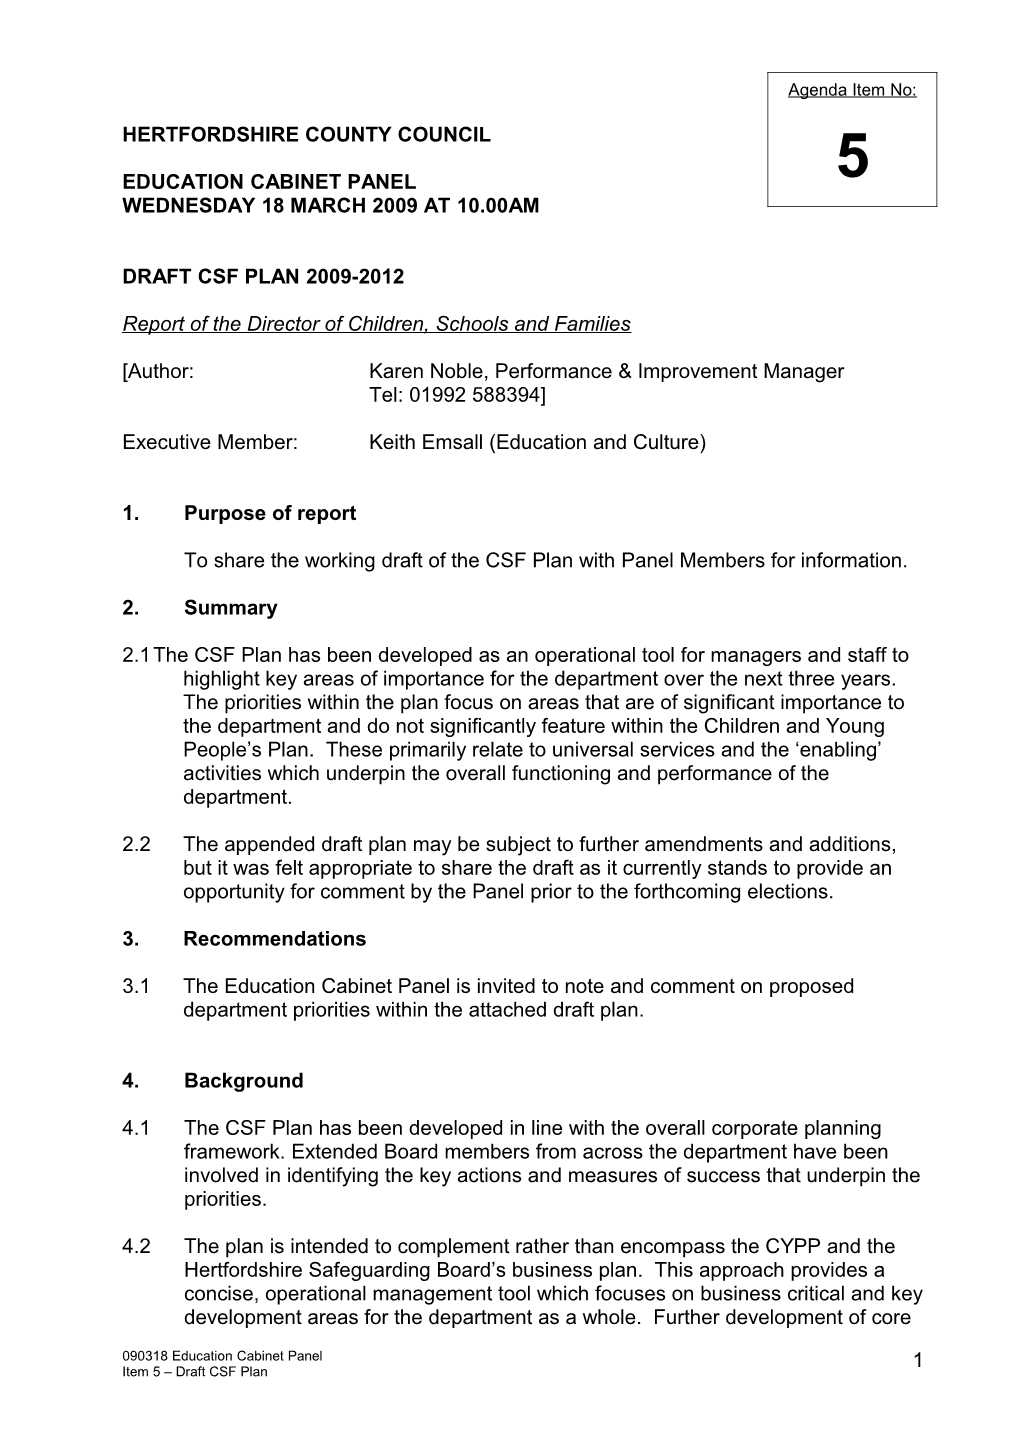 Education Cabinet Panel Wednesday 18 March 2009 at 10.00Am Item 5 - Draft CSF Plan